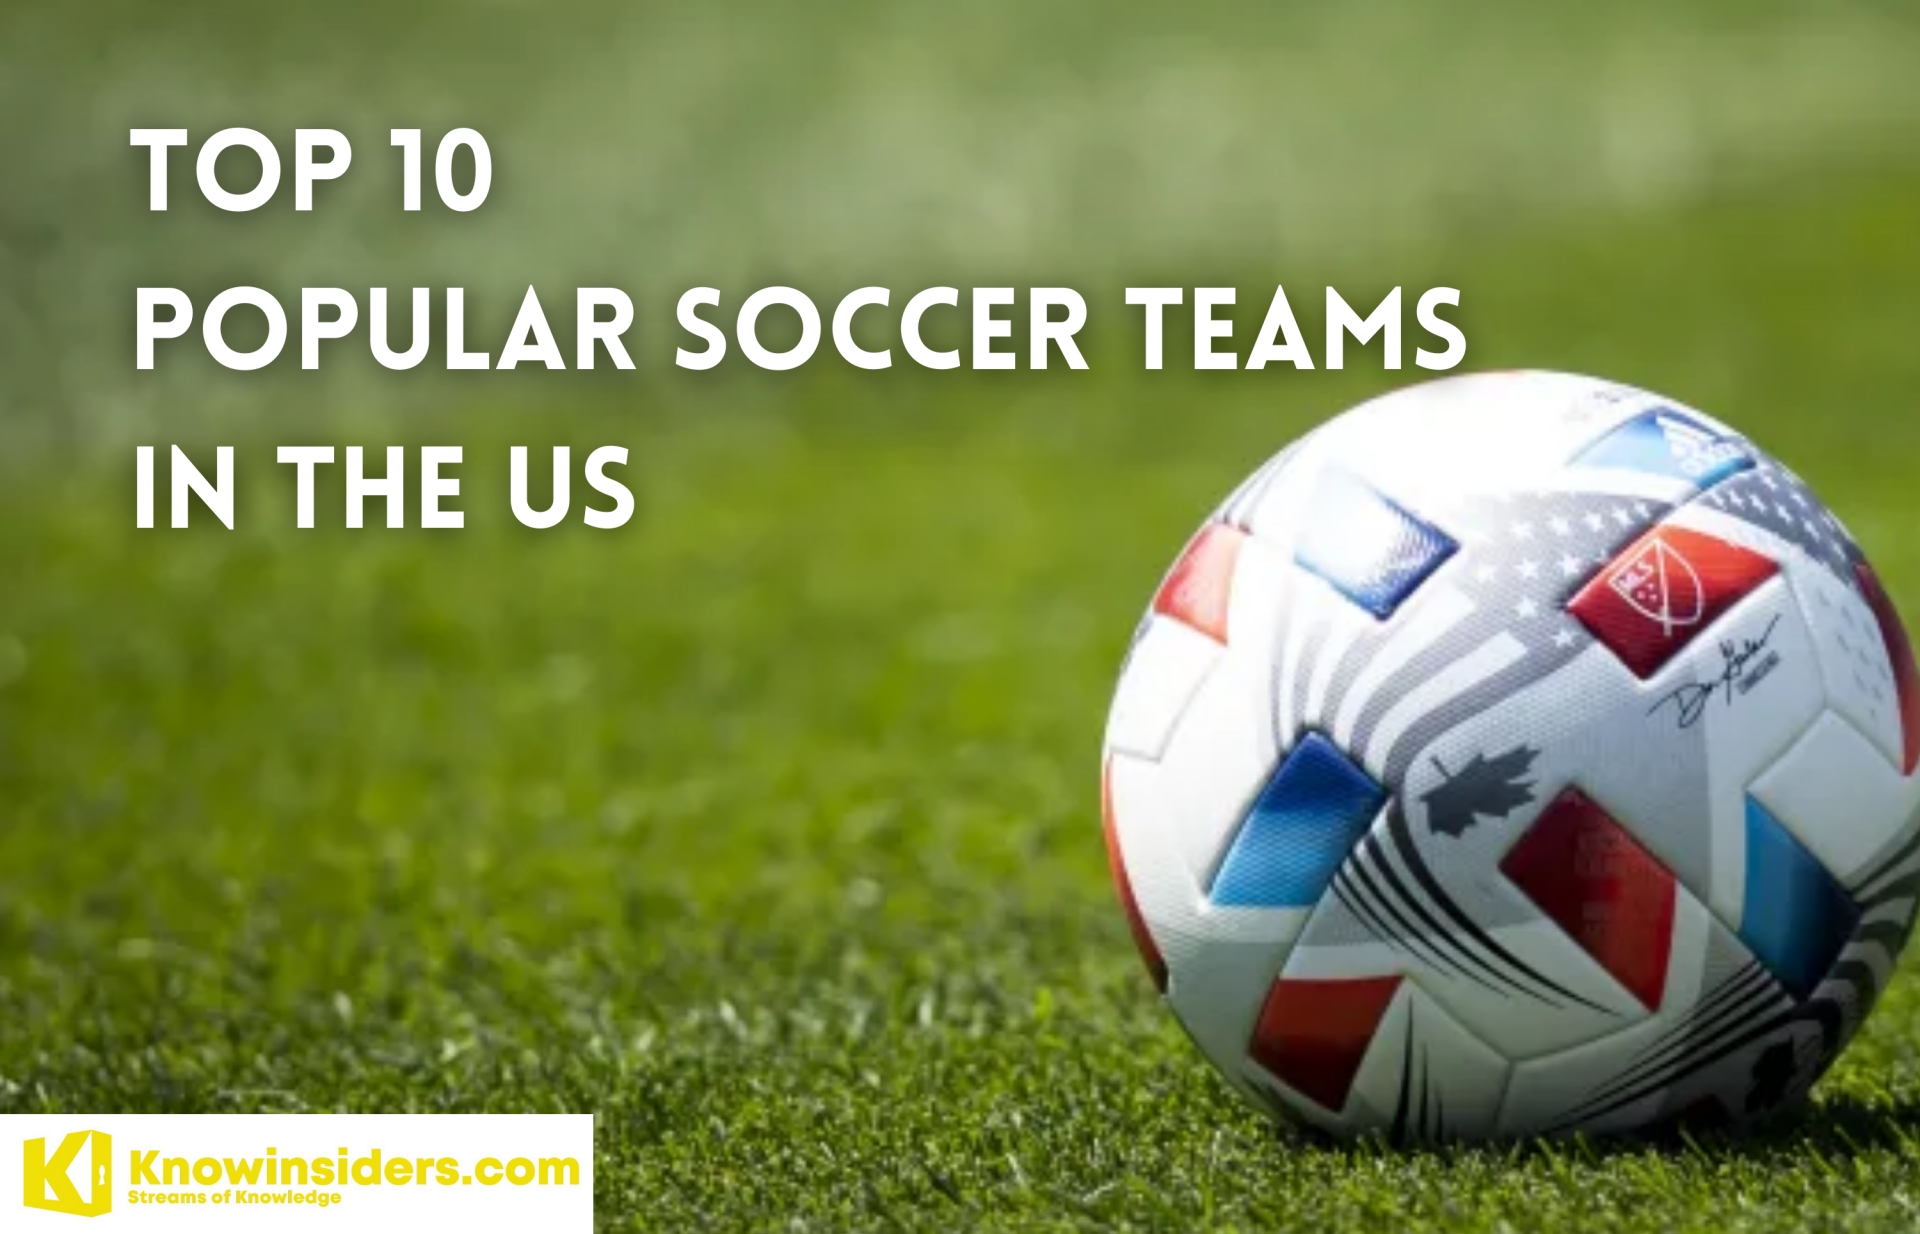 Top 10 Most Popular Soccer Teams in the US